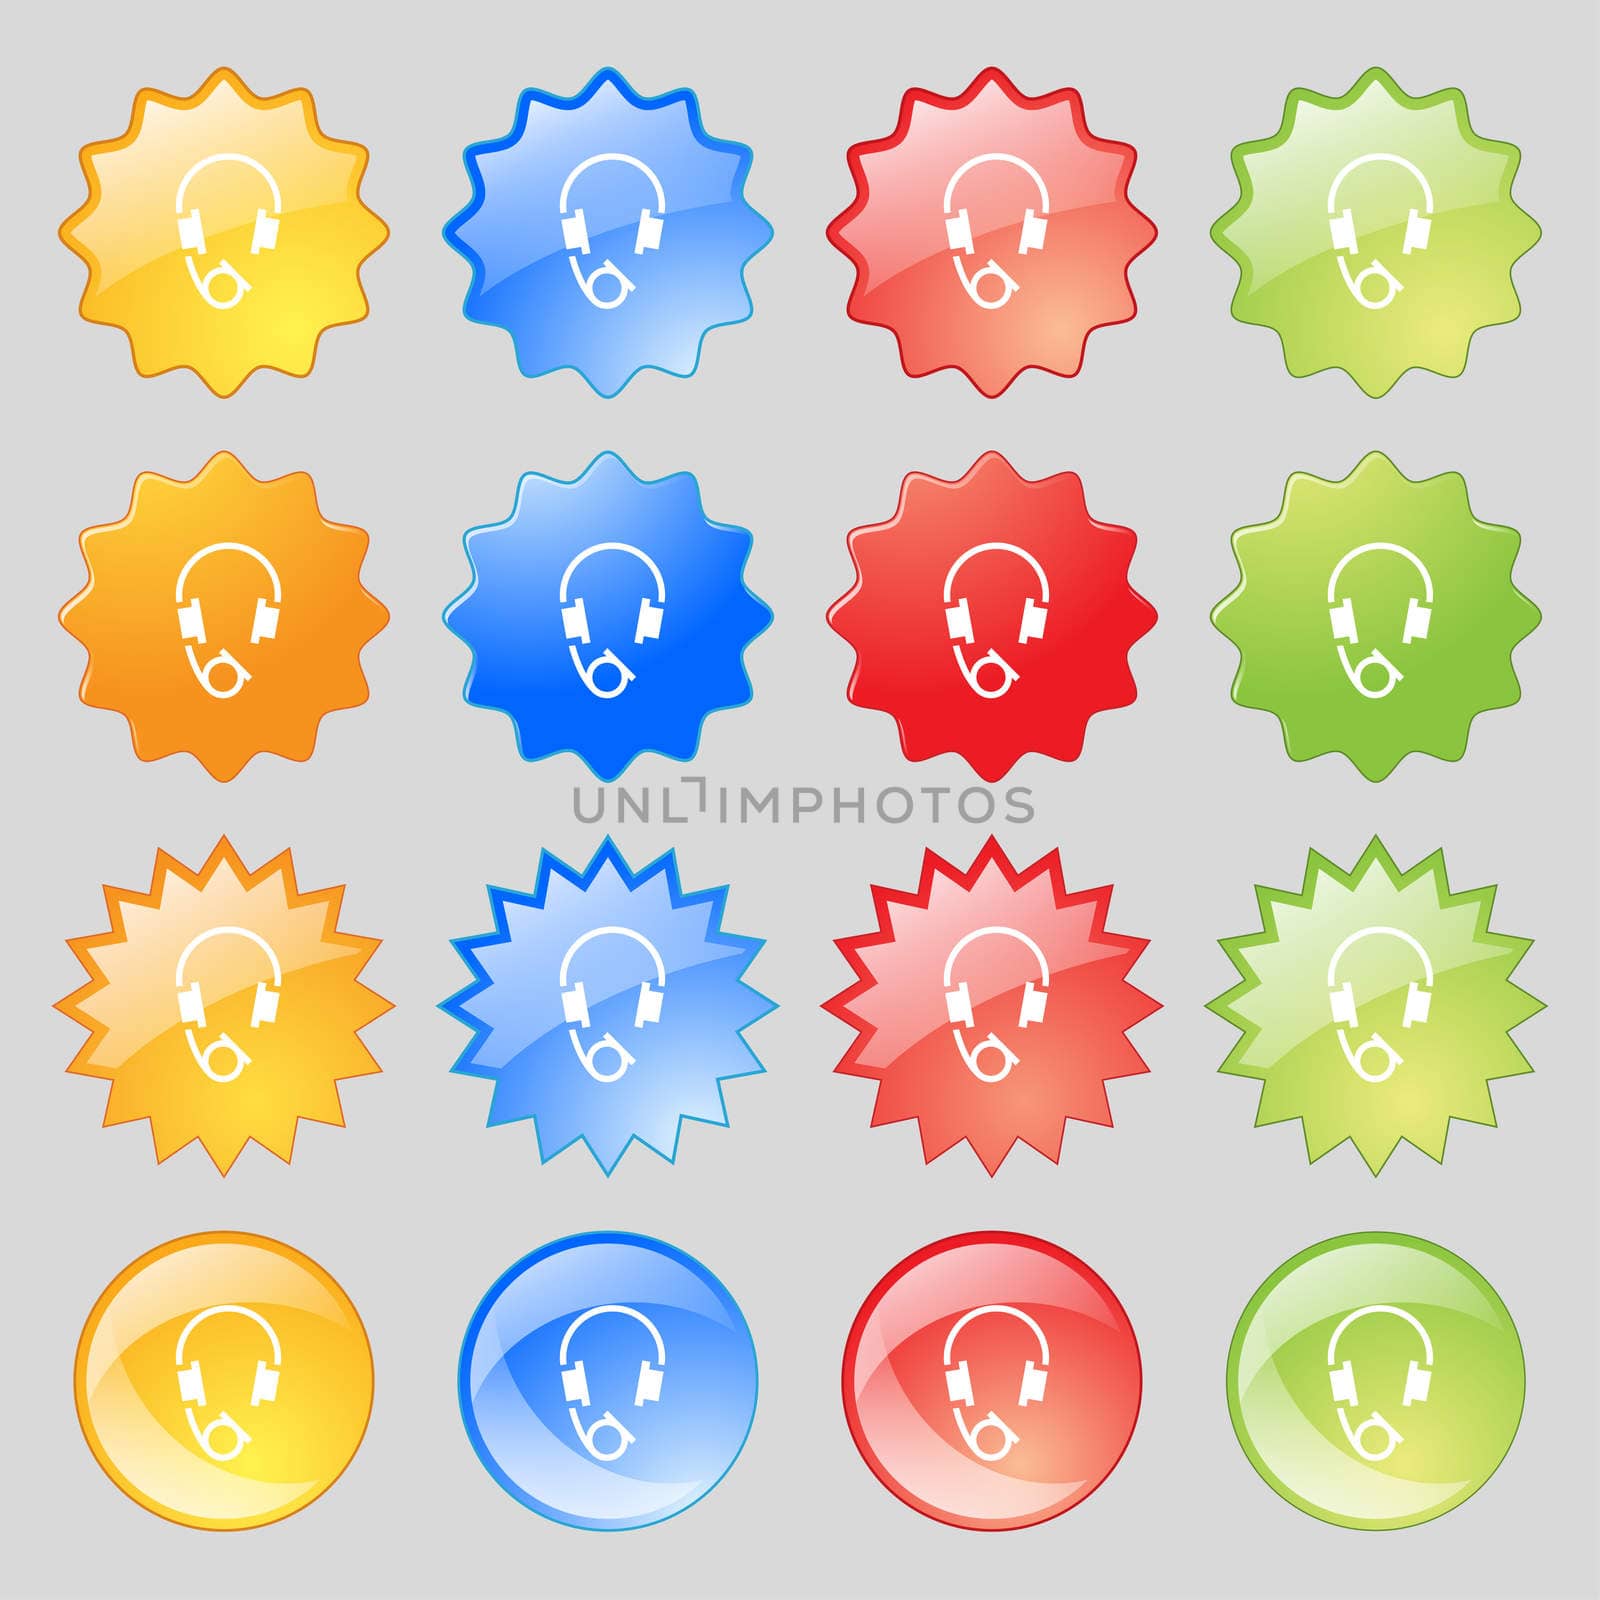 headsets icon sign. Set from fourteen multi-colored glass buttons with place for text. illustration